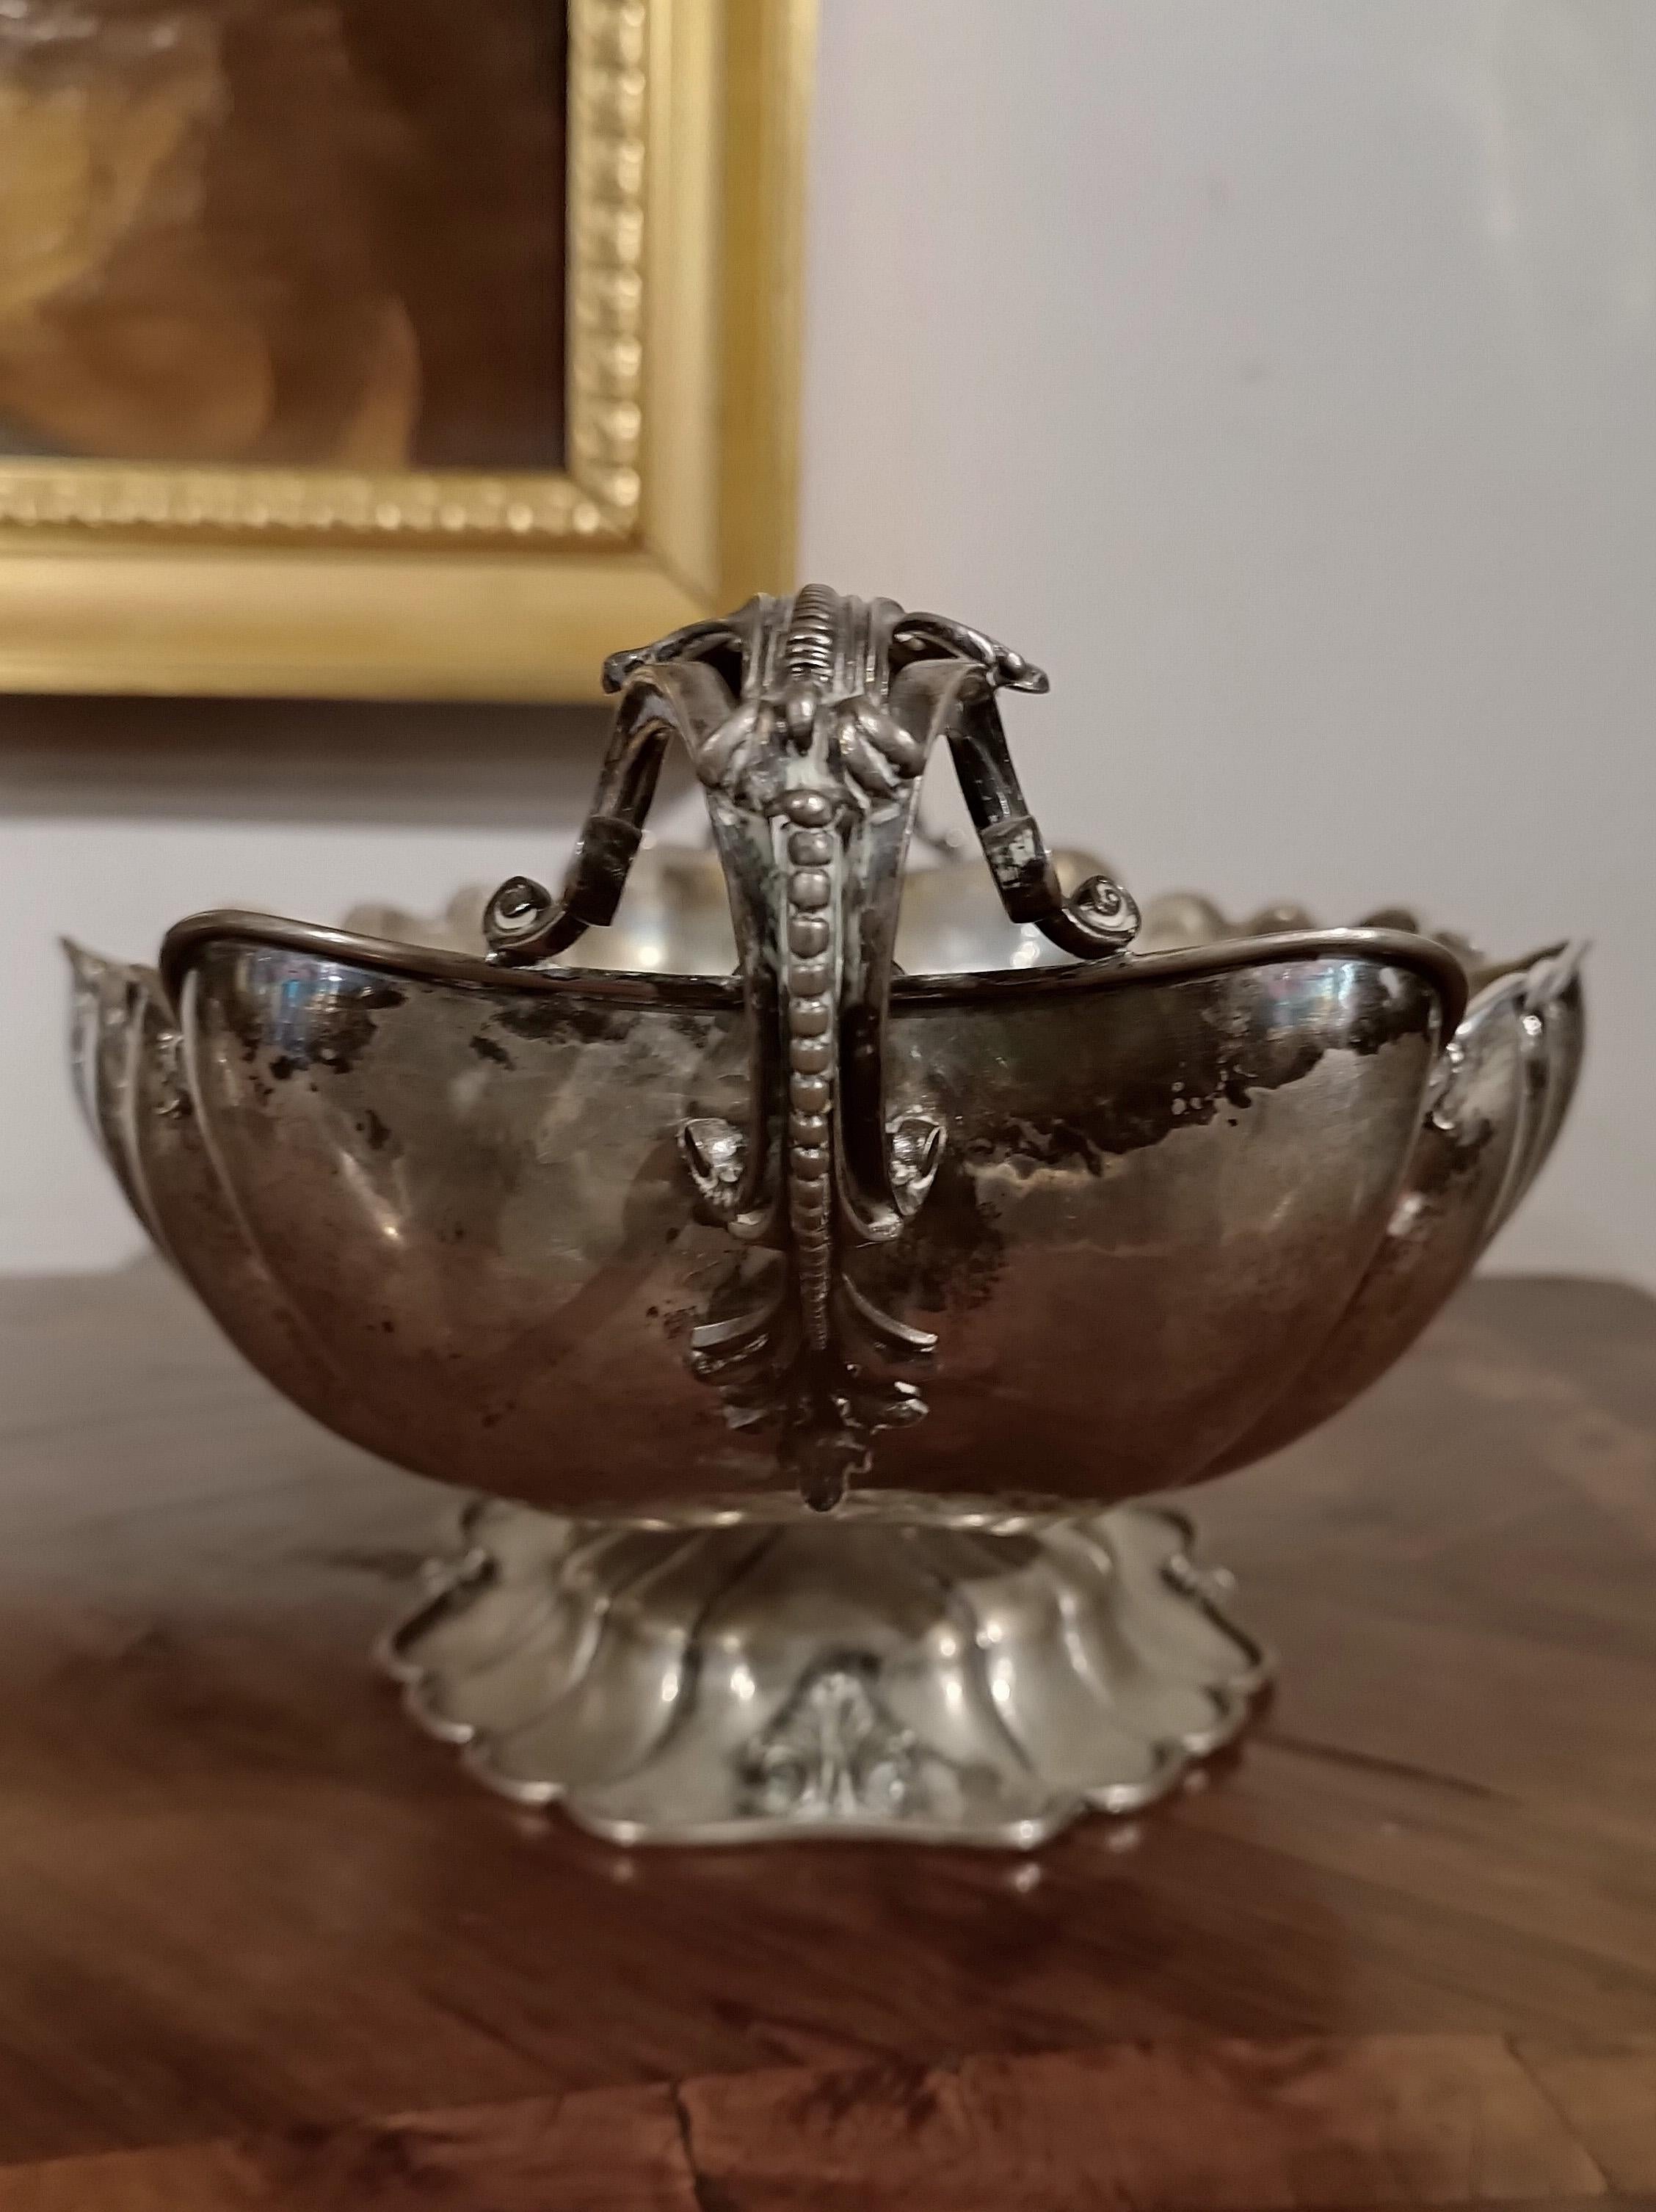 LATE 19th-EARLY 20th CENTURY ITALIAN SILVER CENTERPIECE For Sale 1